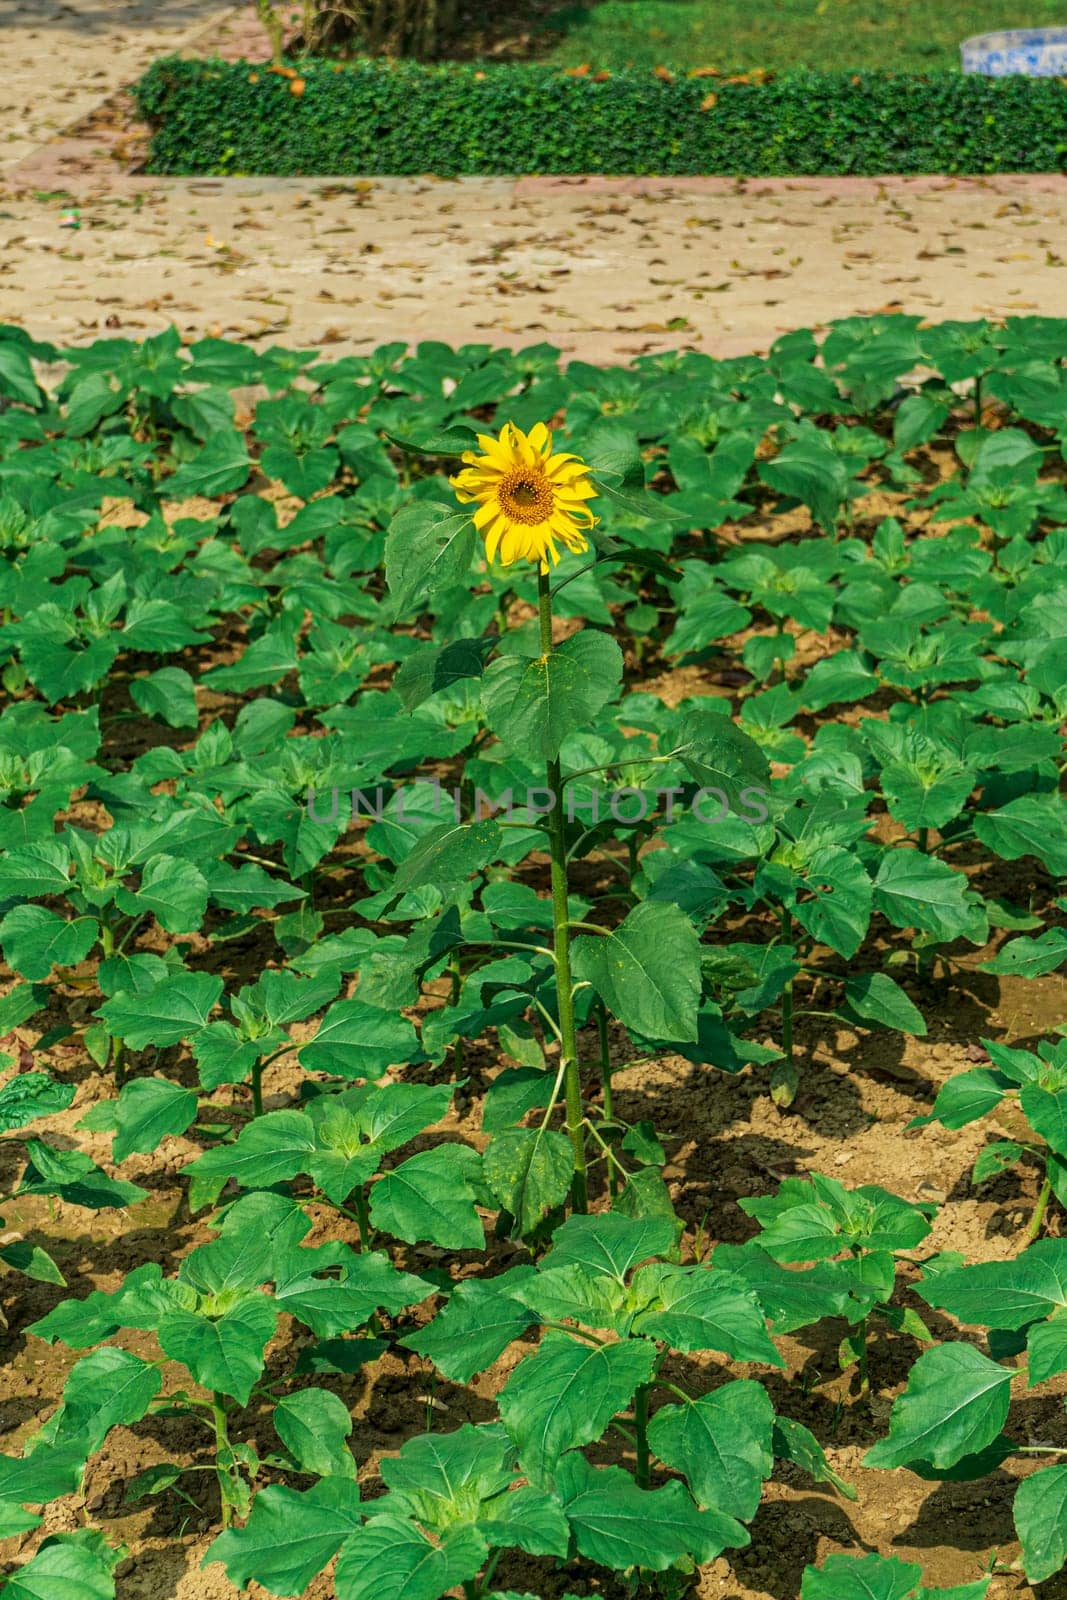 Single young of flower sunflower among many green leaves